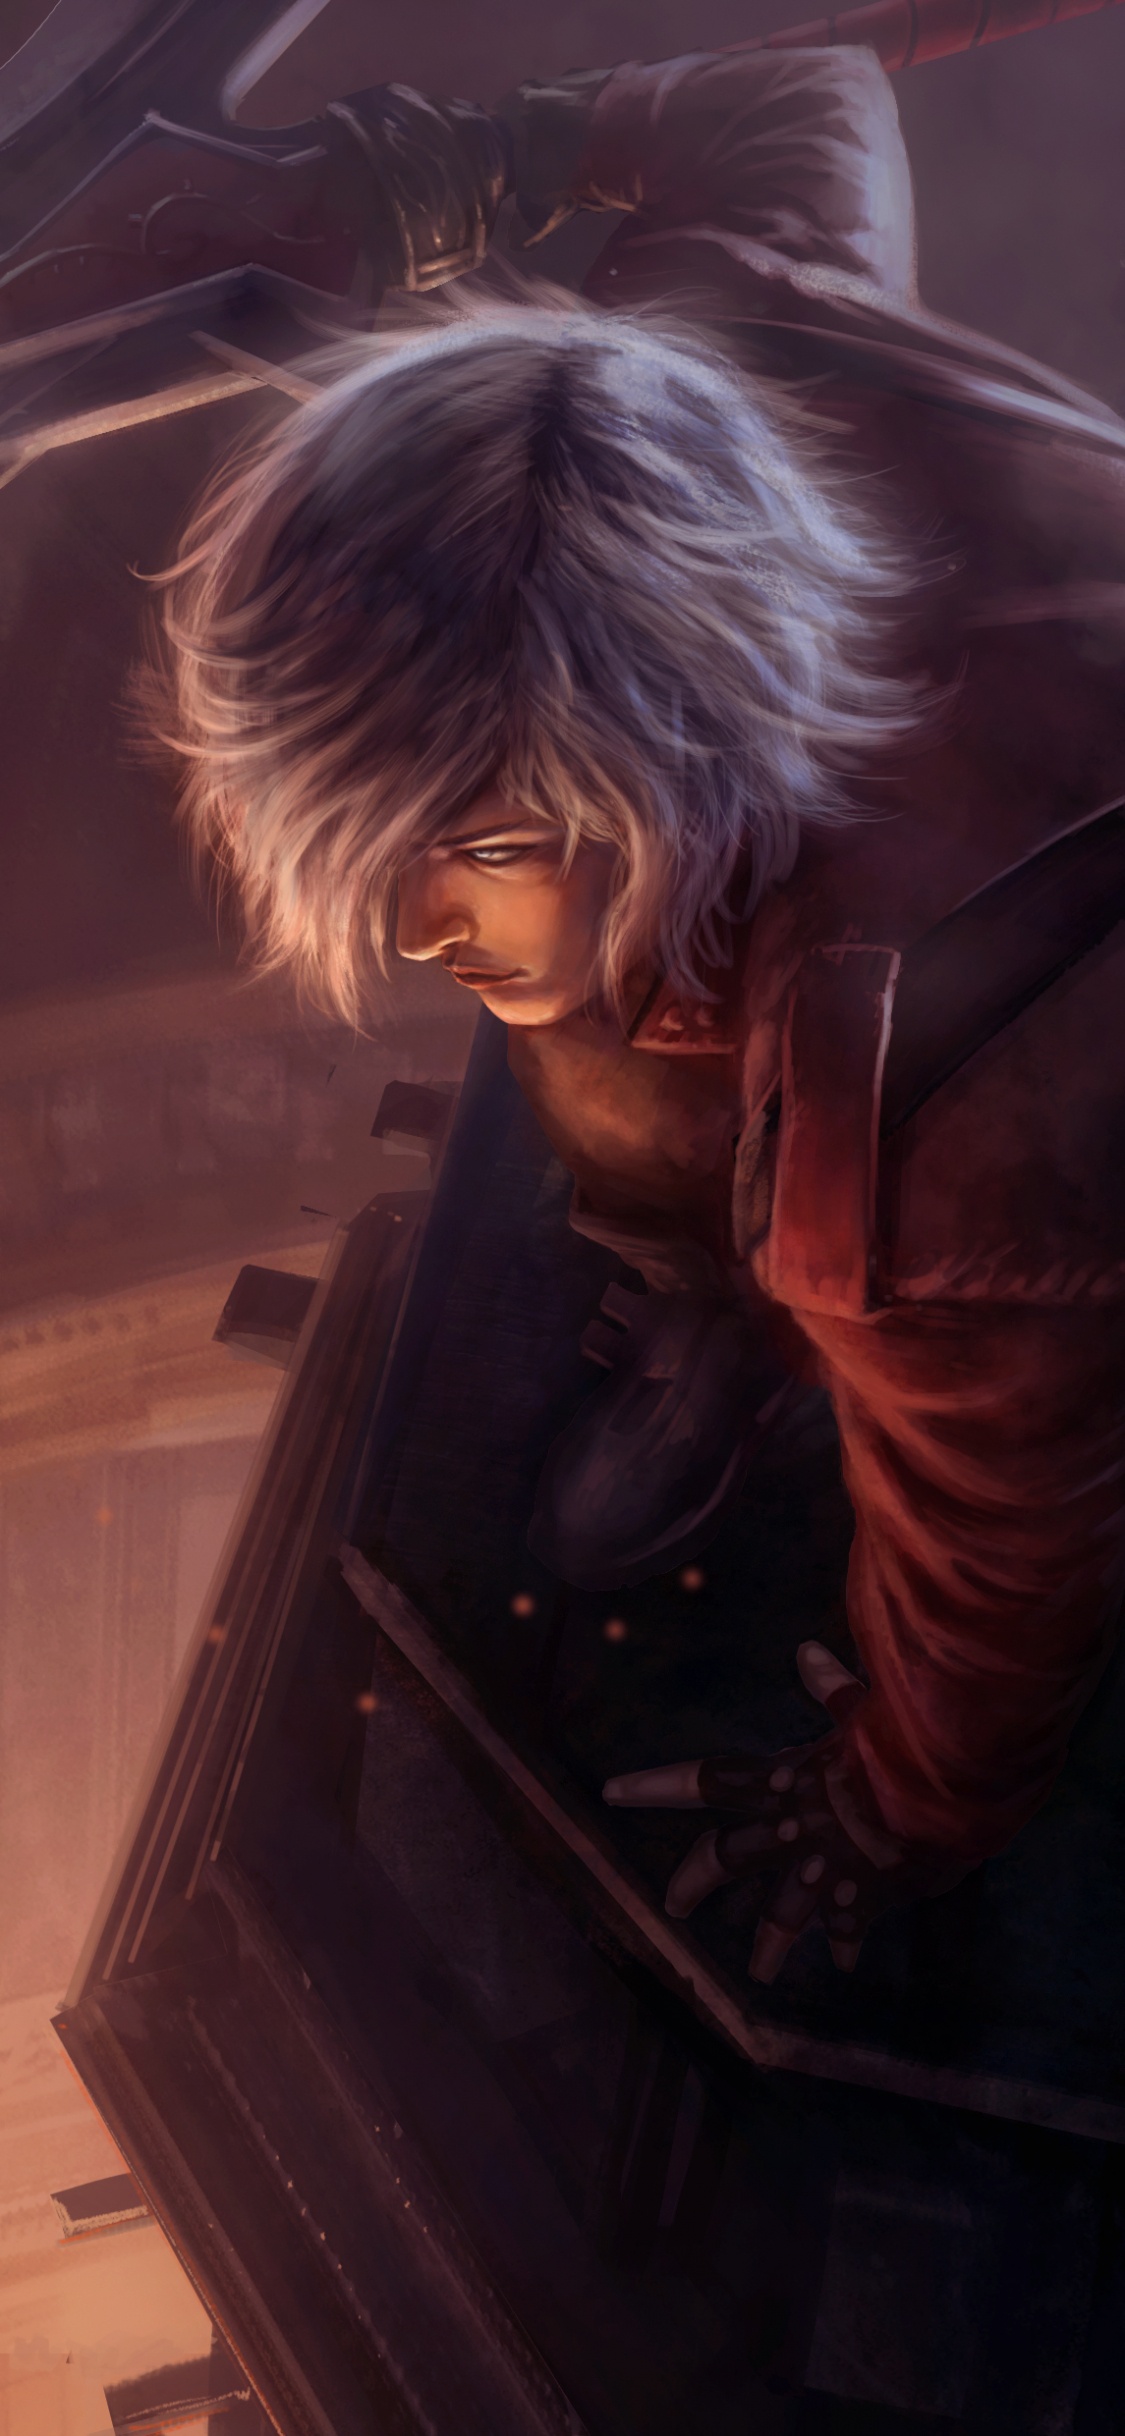 Devil May Cry, Devil May Cry 5, Dmc Devil May Cry, Devil May Cry 4, Dante. Wallpaper in 1125x2436 Resolution